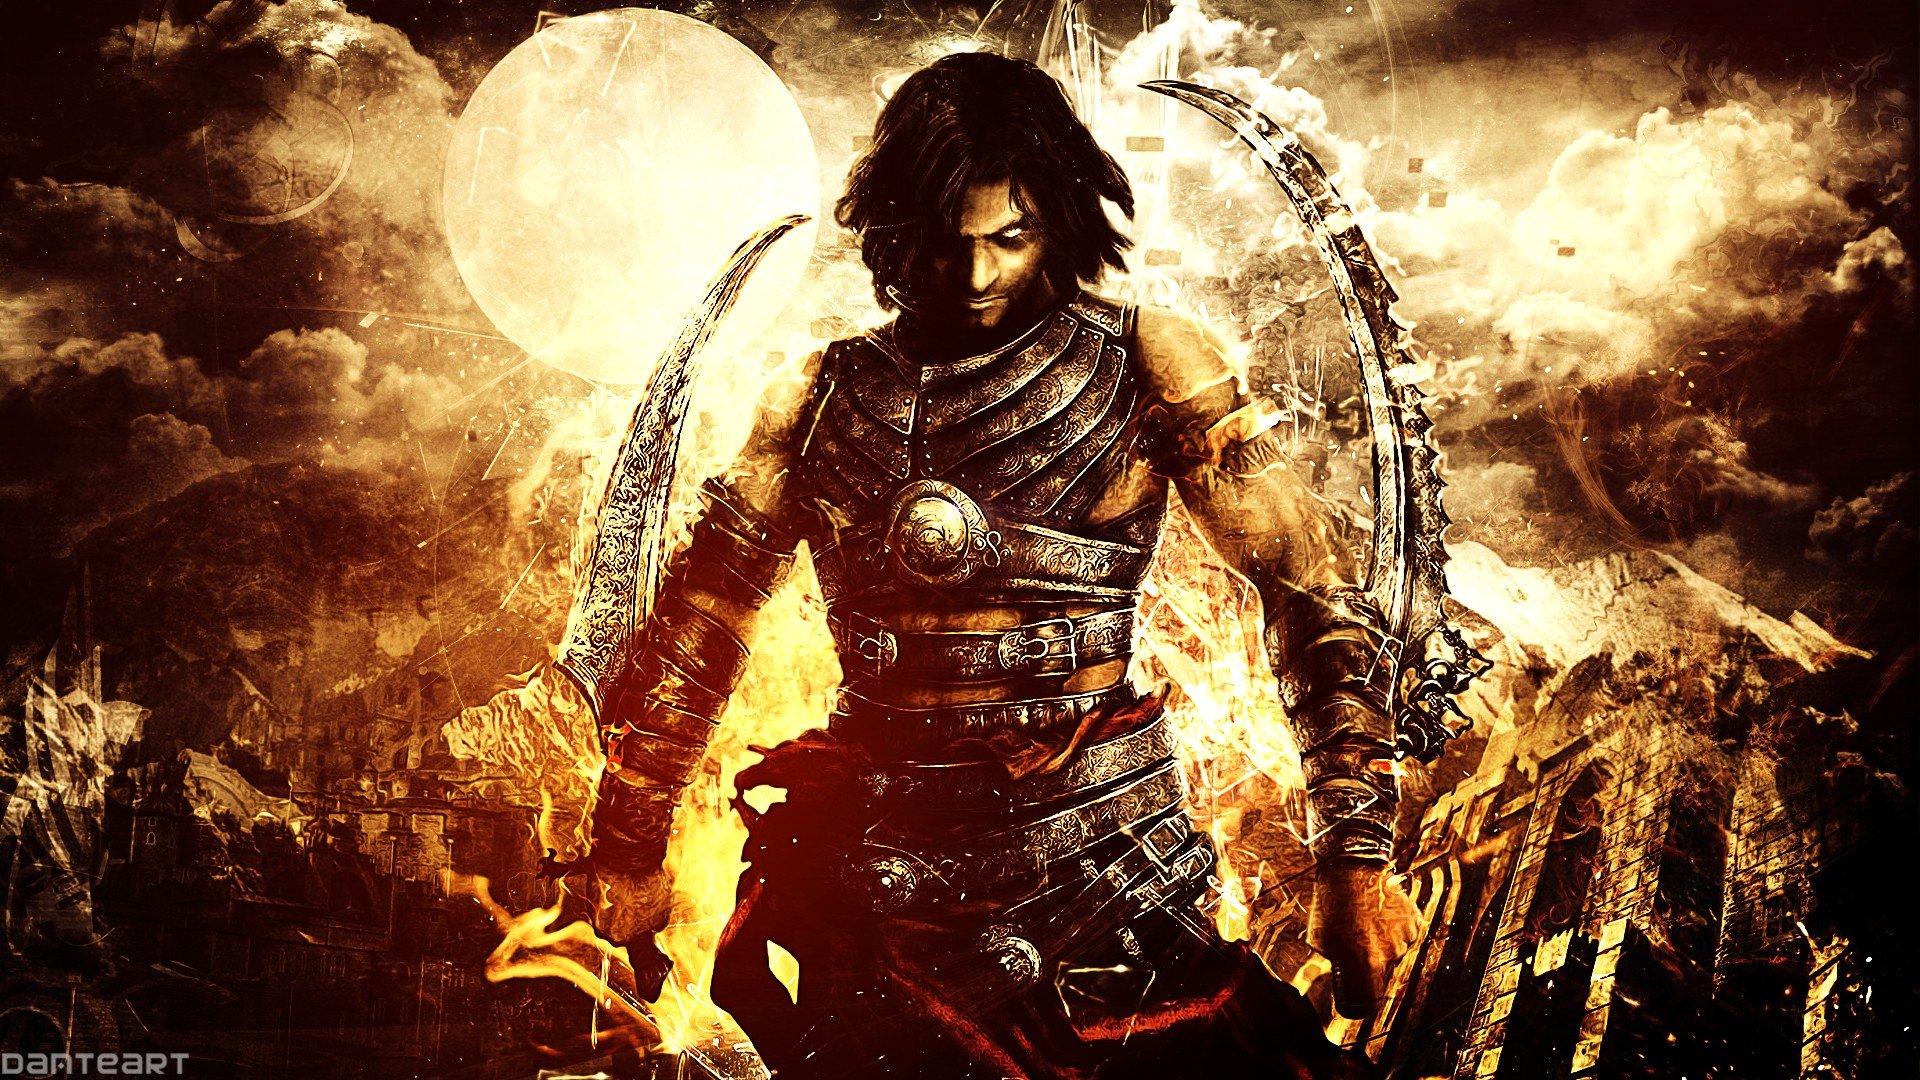 Prince of Persia, Tattoo, Prince of Persia: Warrior Within Wallpaper